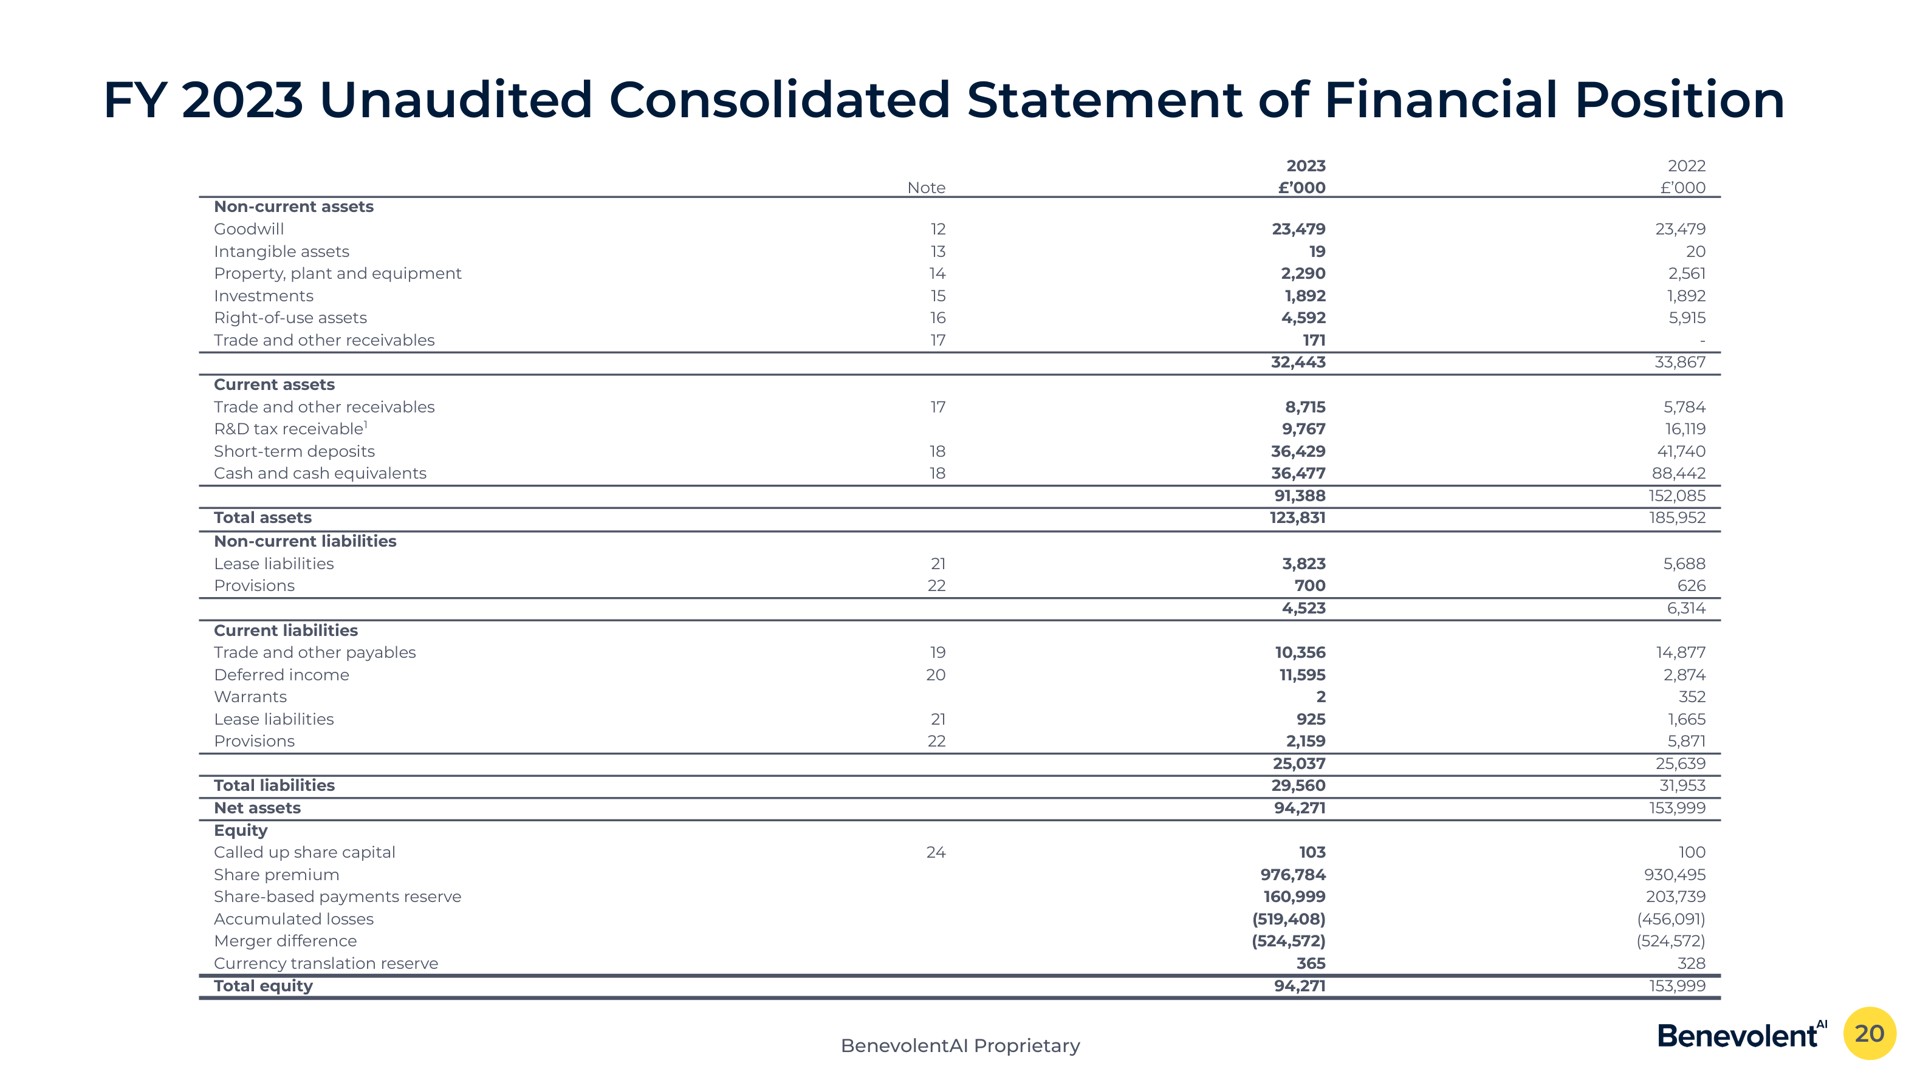 unaudited consolidated statement of financial position | BenevolentAI